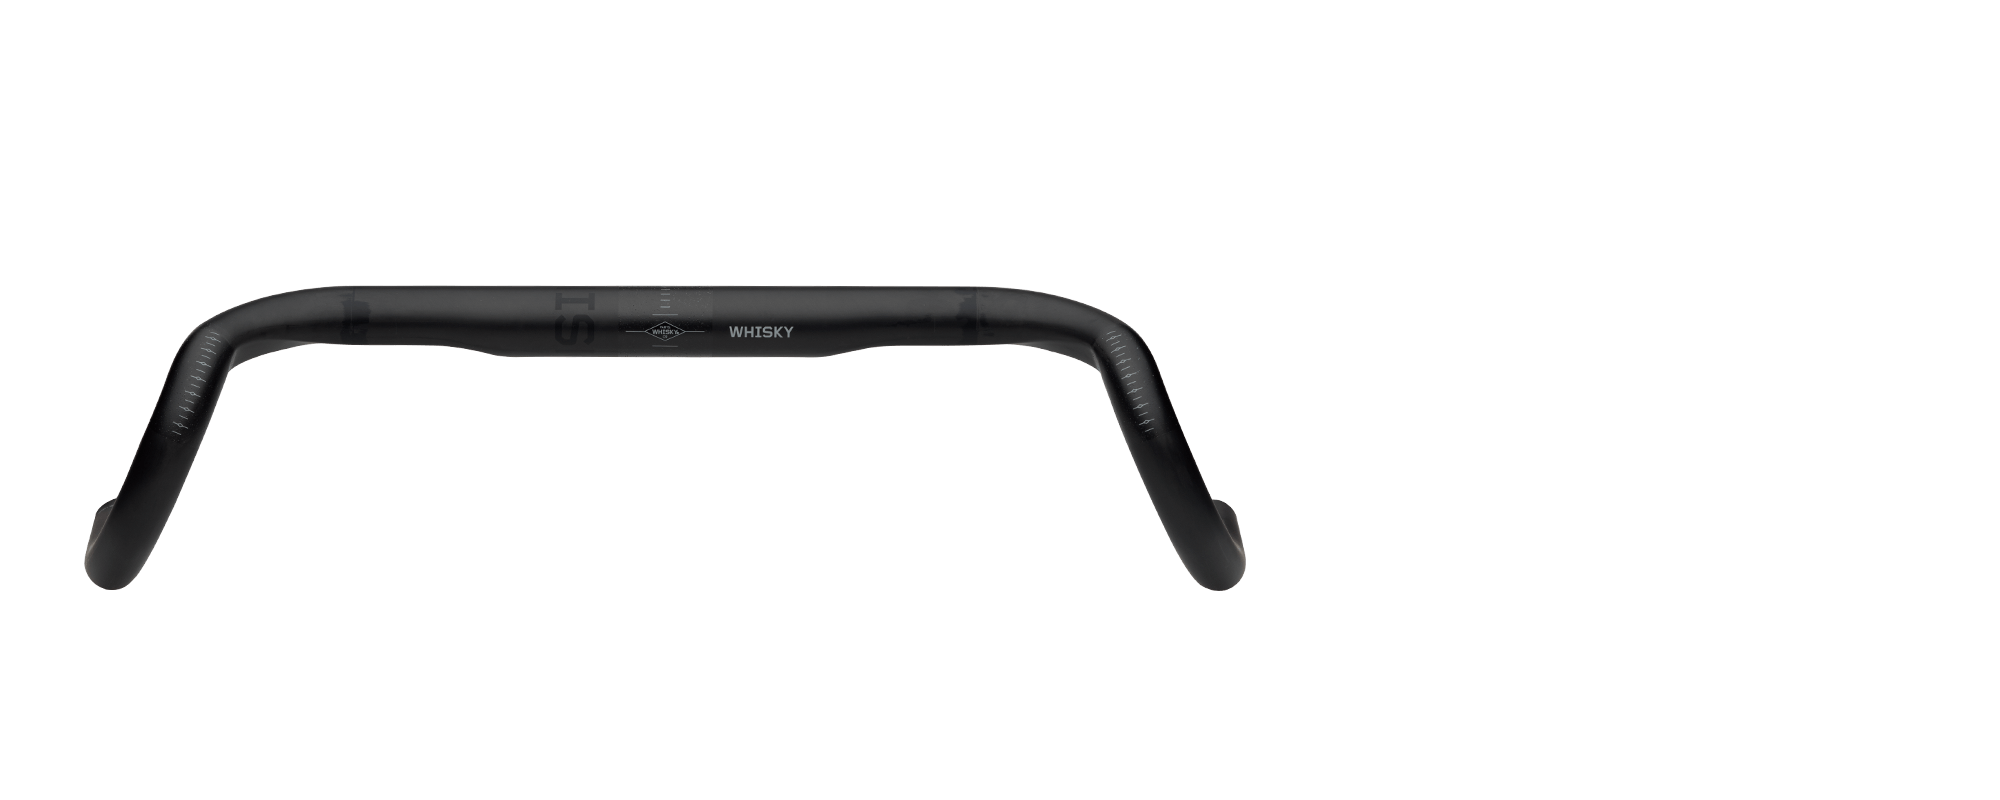 Whisky No9 24F Handlebar - Black - shown from the front